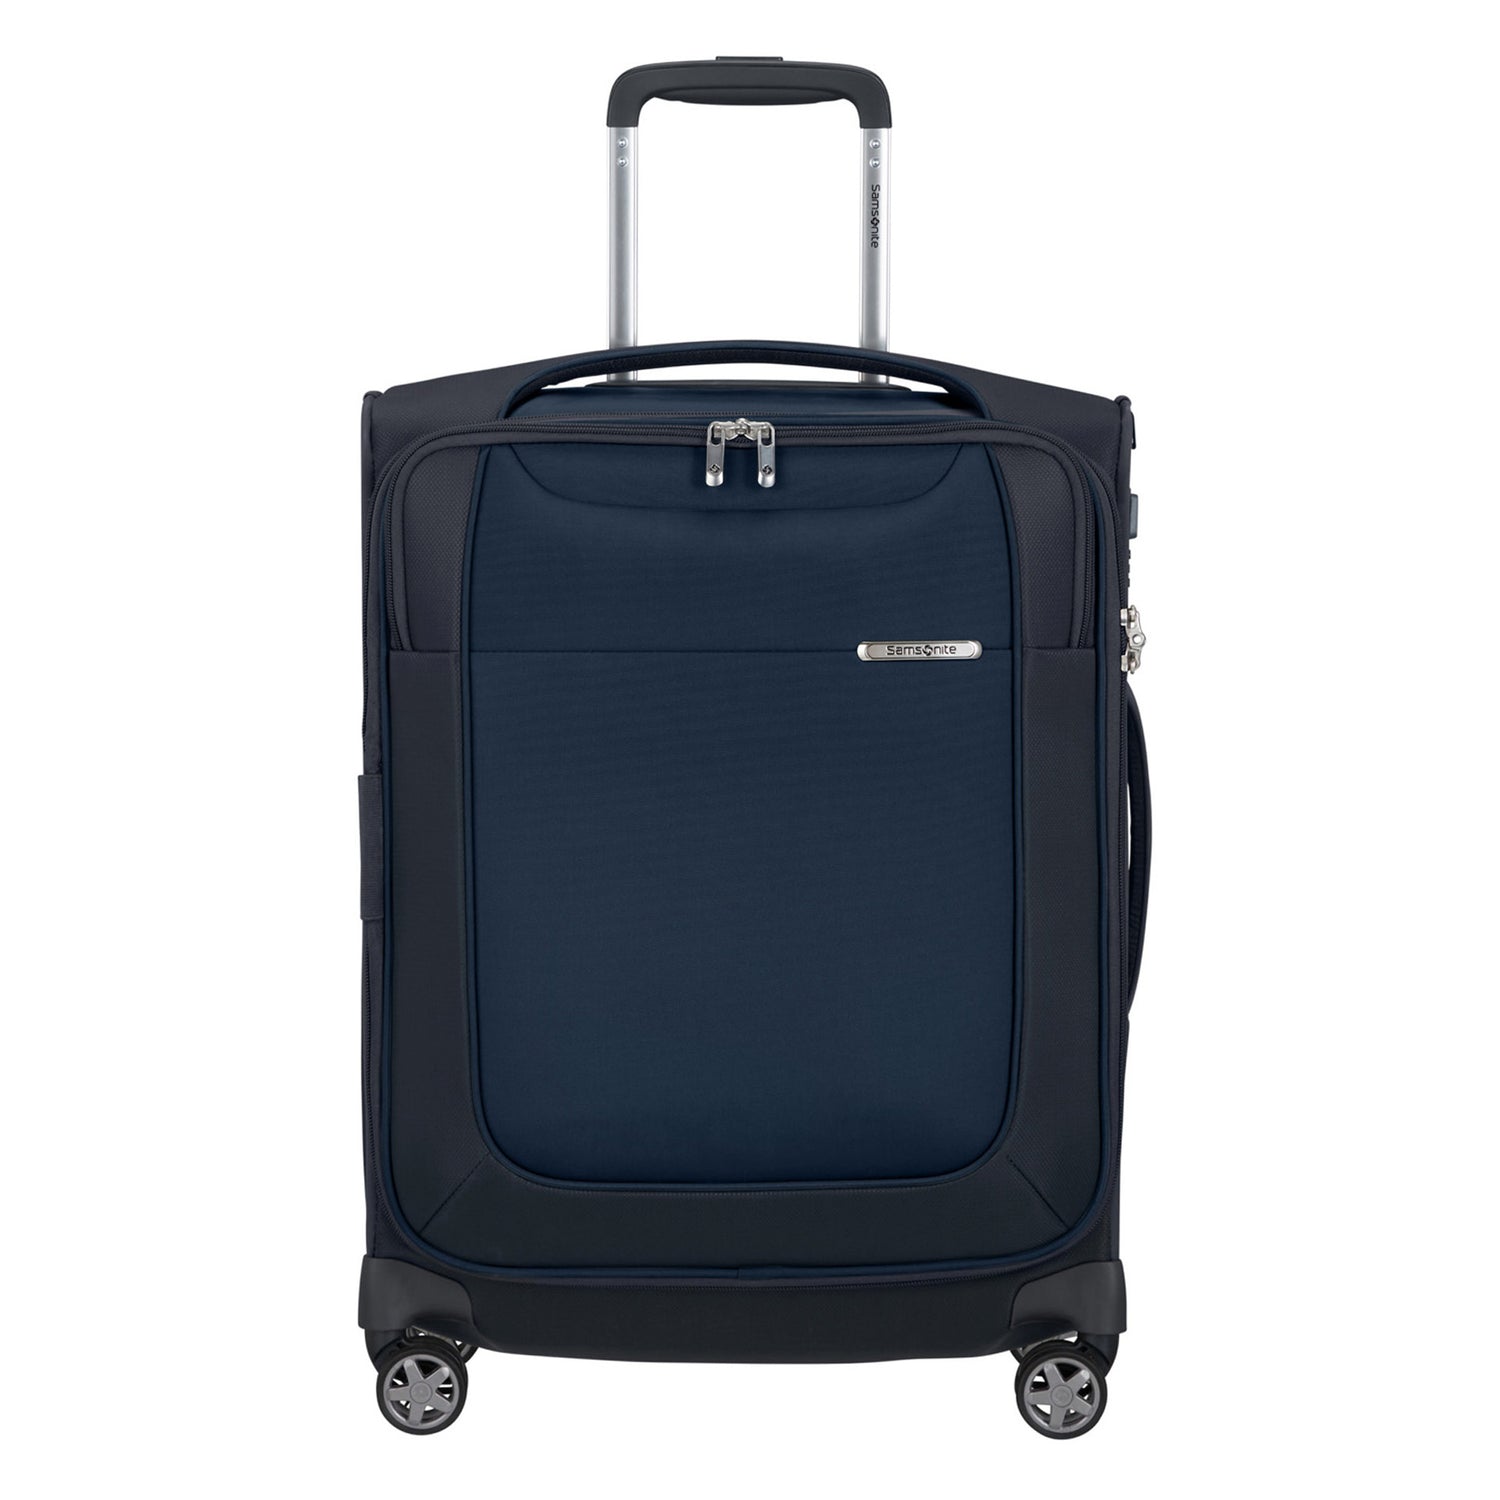 D-Lite Softside 21" Carry-On Luggage - Bentley